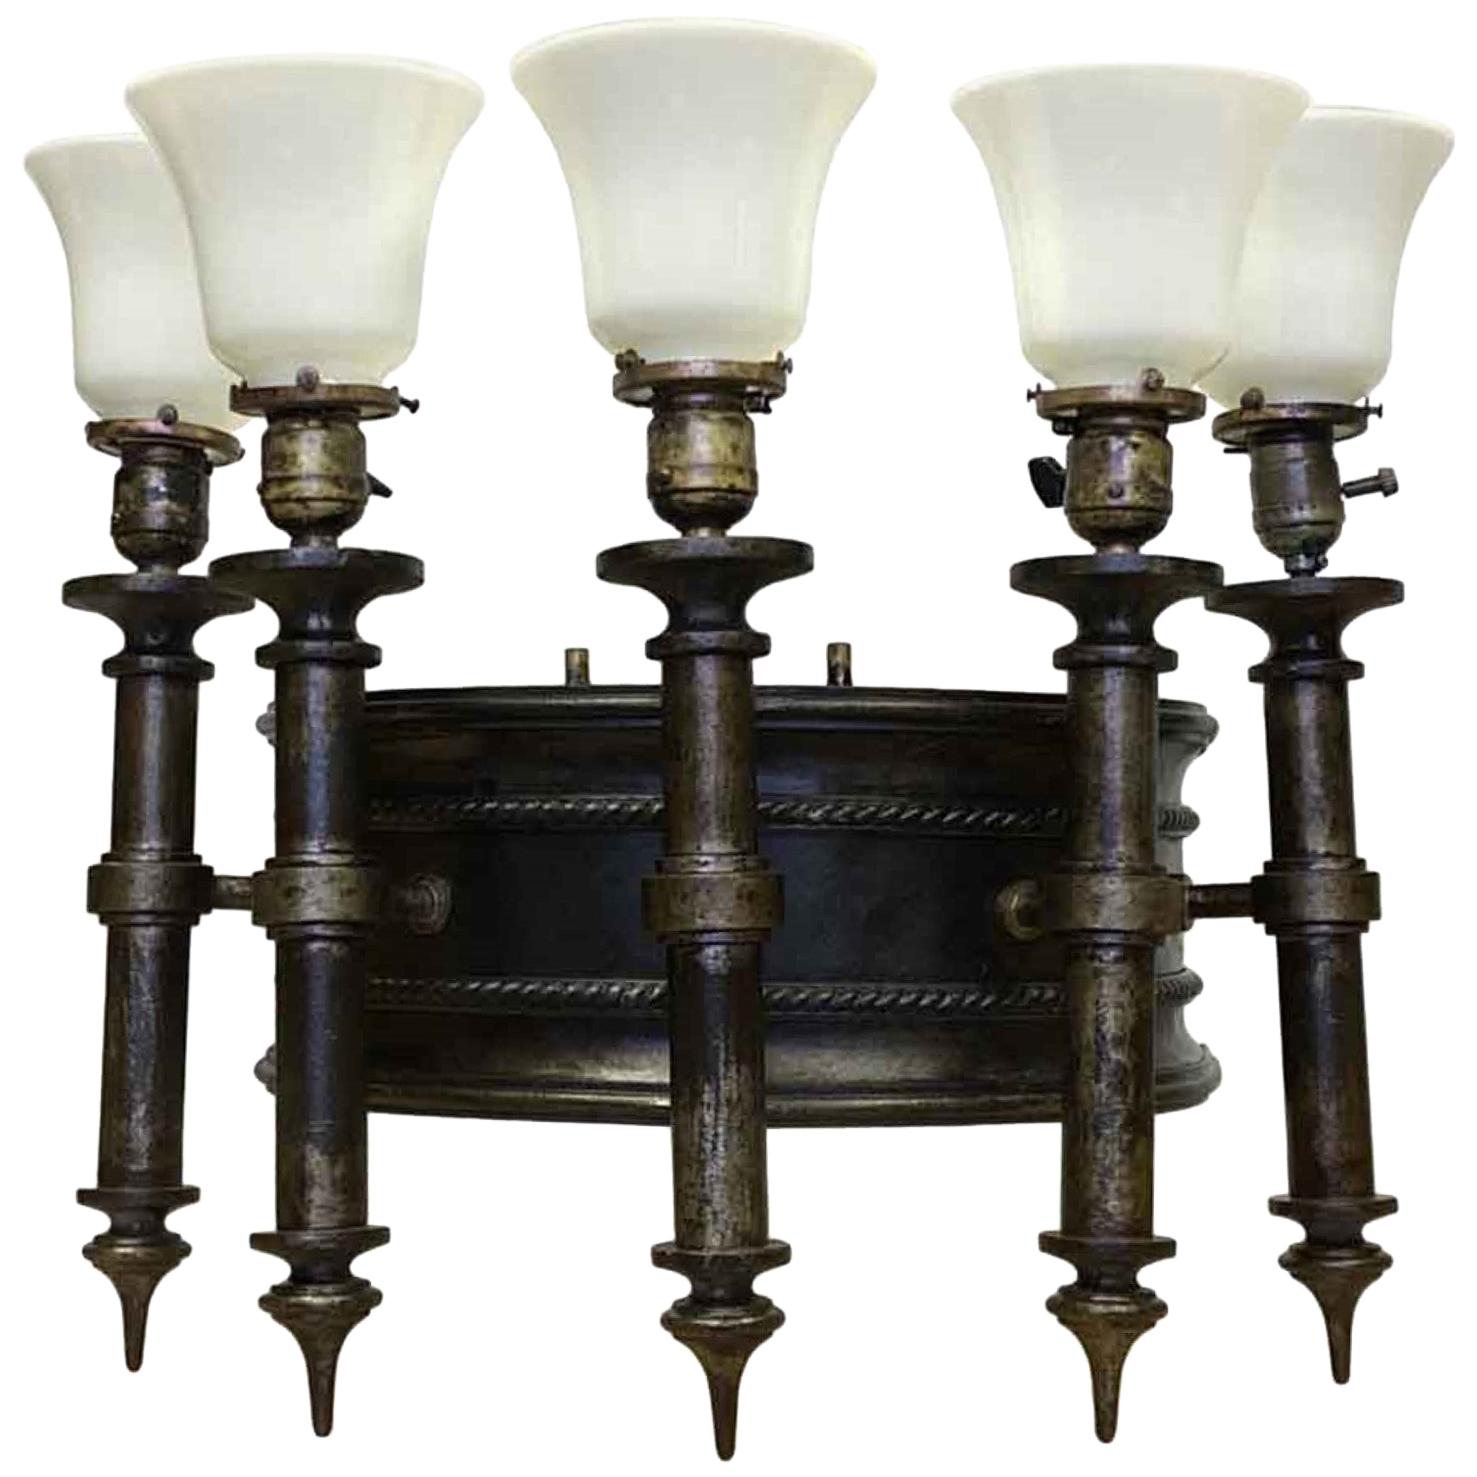 ANTIQUE WALL SCONCE ART CASTLE BRASS GOTHIC CANDLESTICKS CANDLE STICKS ELECTRIC 